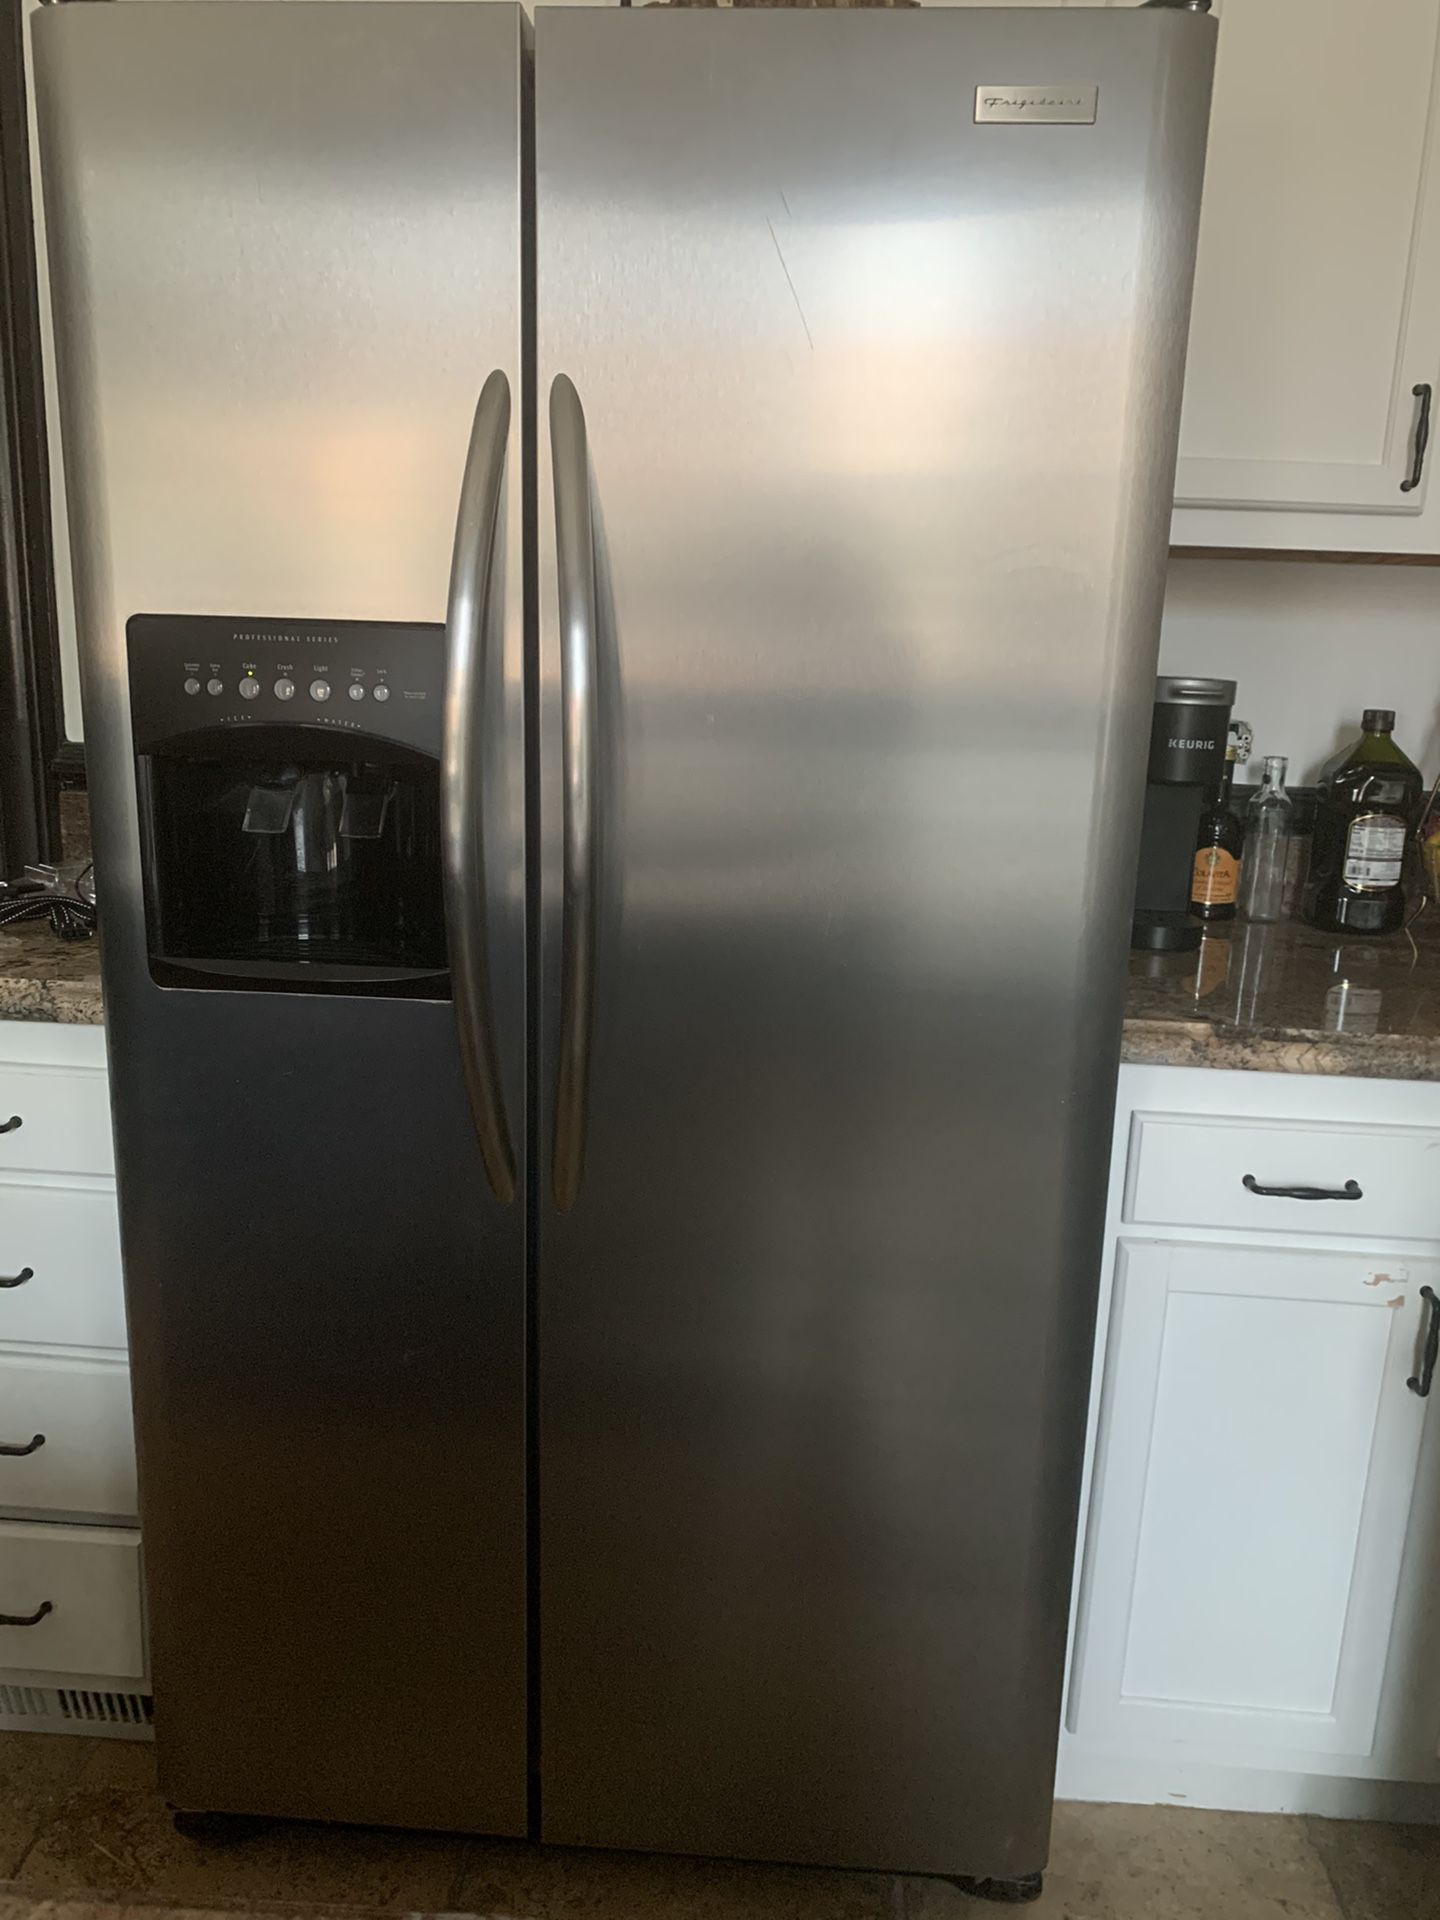 Frigidaire professional series side by side refrigerator with ice maker